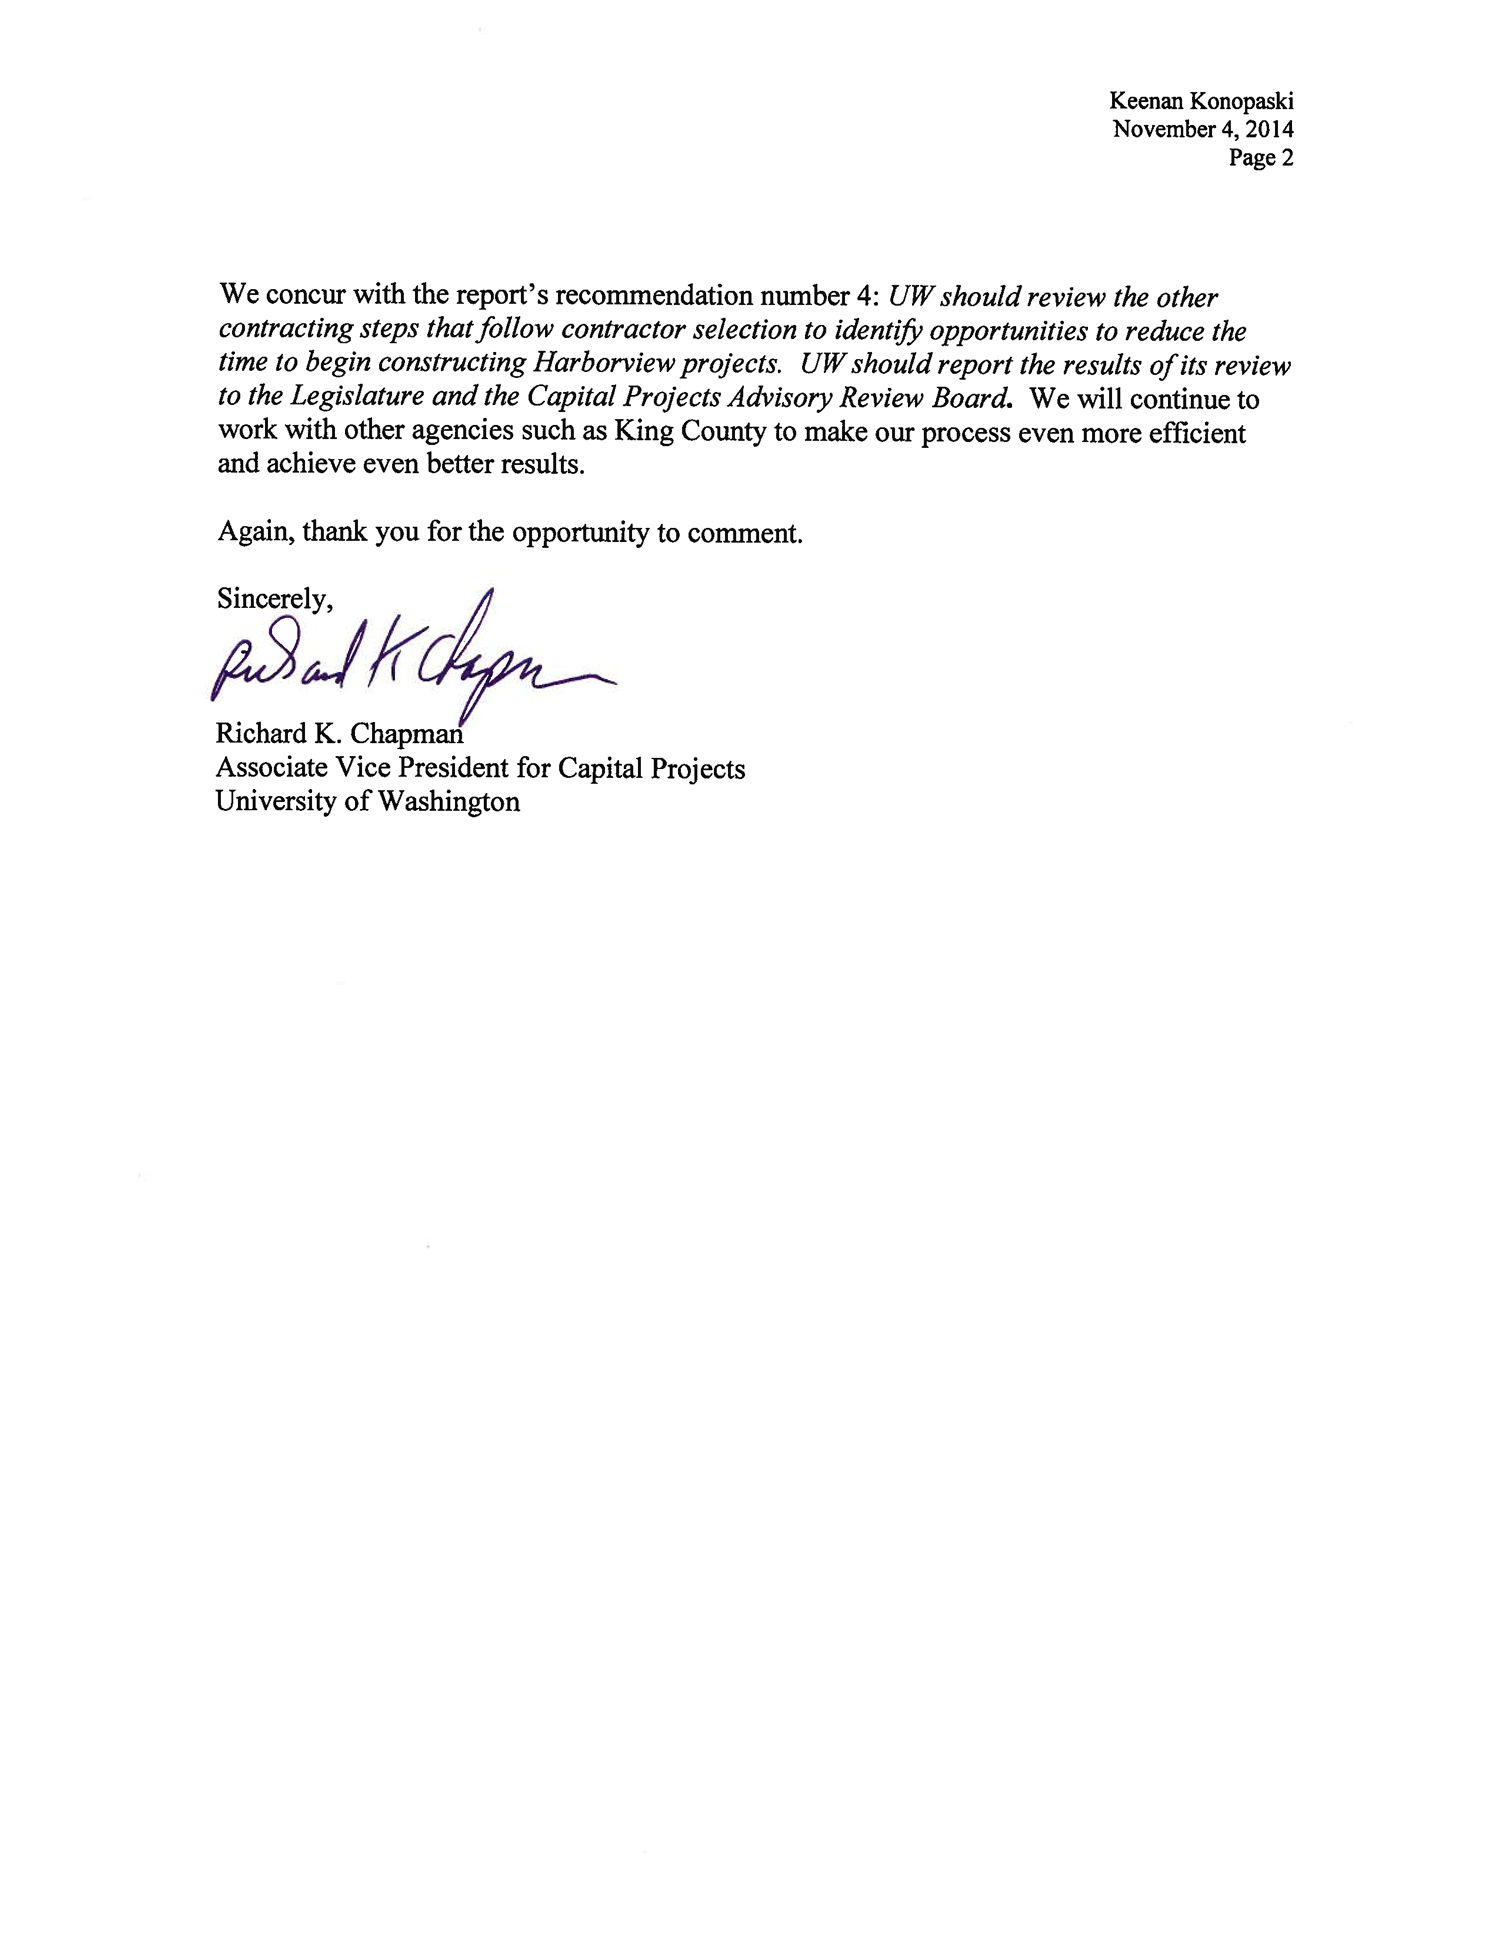 UW Agency response letter page two. Signed by Richard K. Chapman, Associate Vice President for Capital Projects at UW.